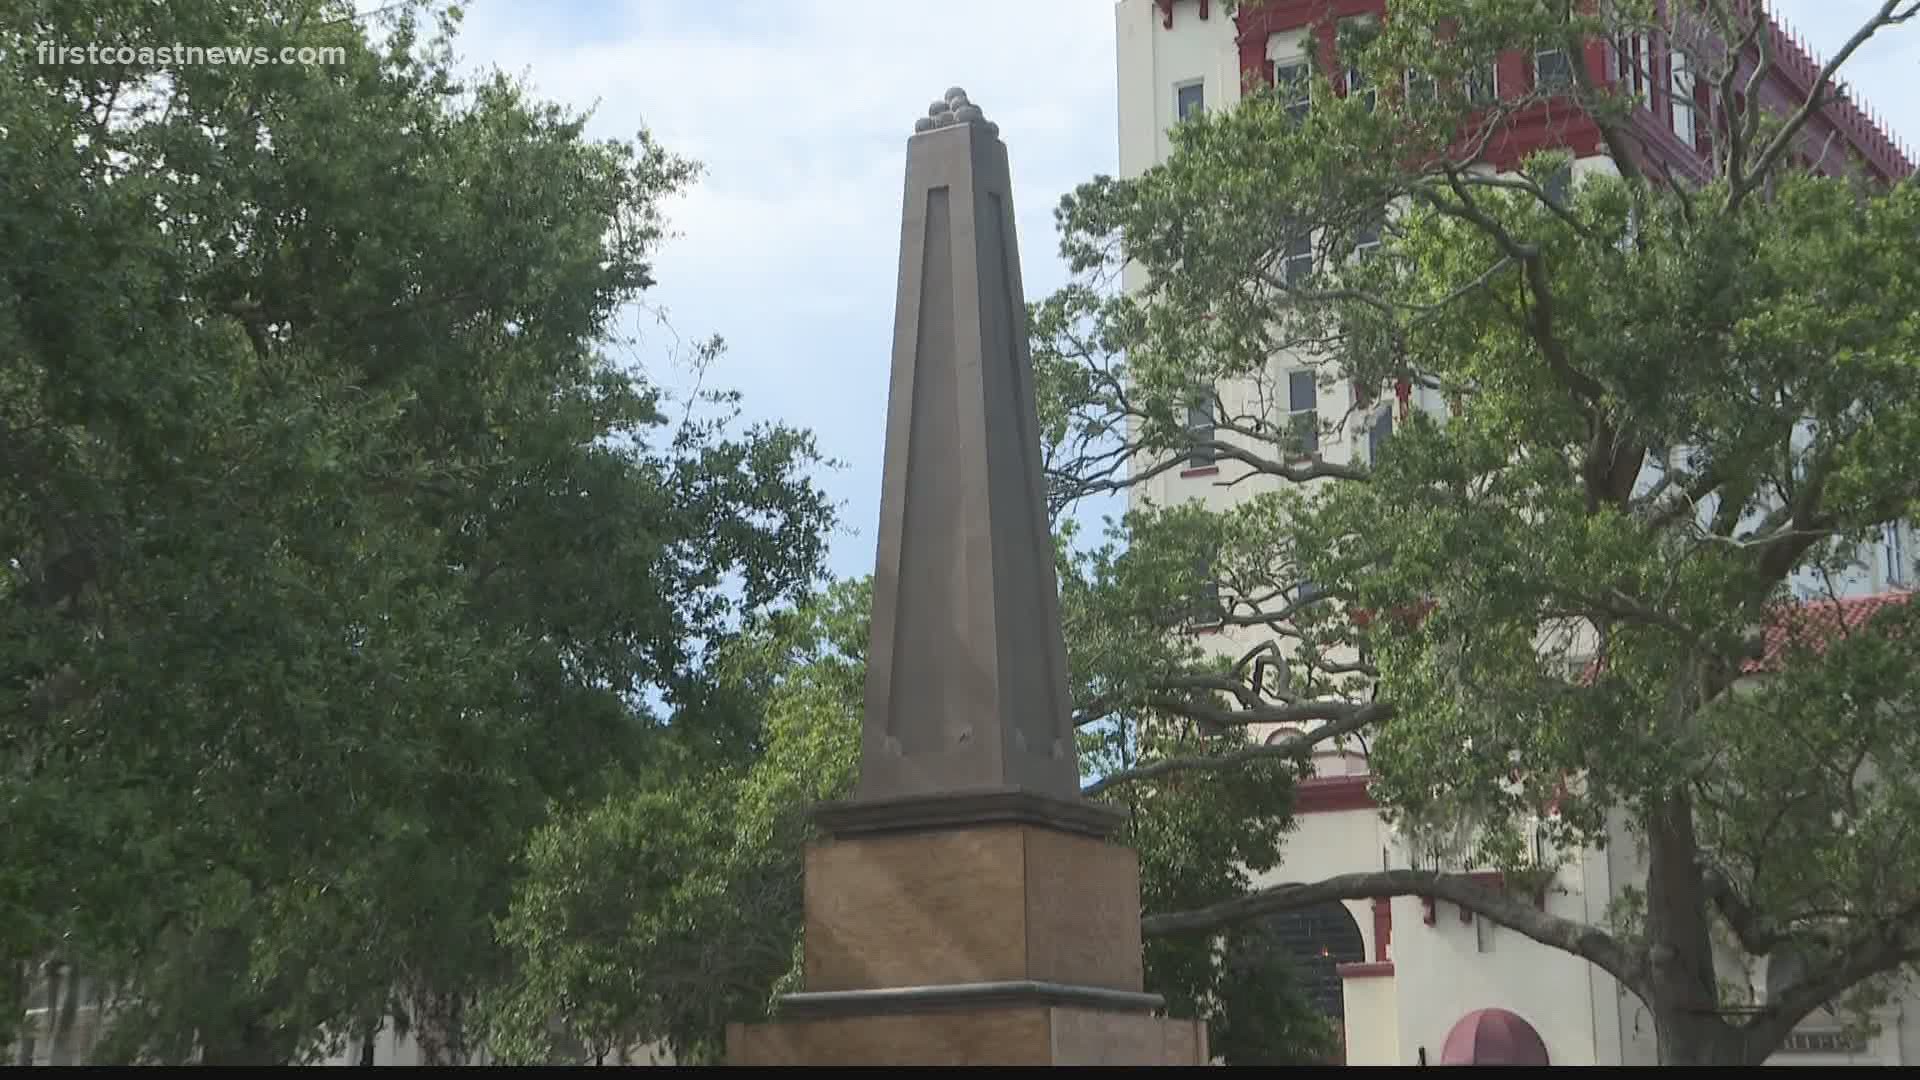 Earlier this summer, the city commission voted 3-2 to remove the Confederate memorial from the downtown Plaza de la Constitucion.